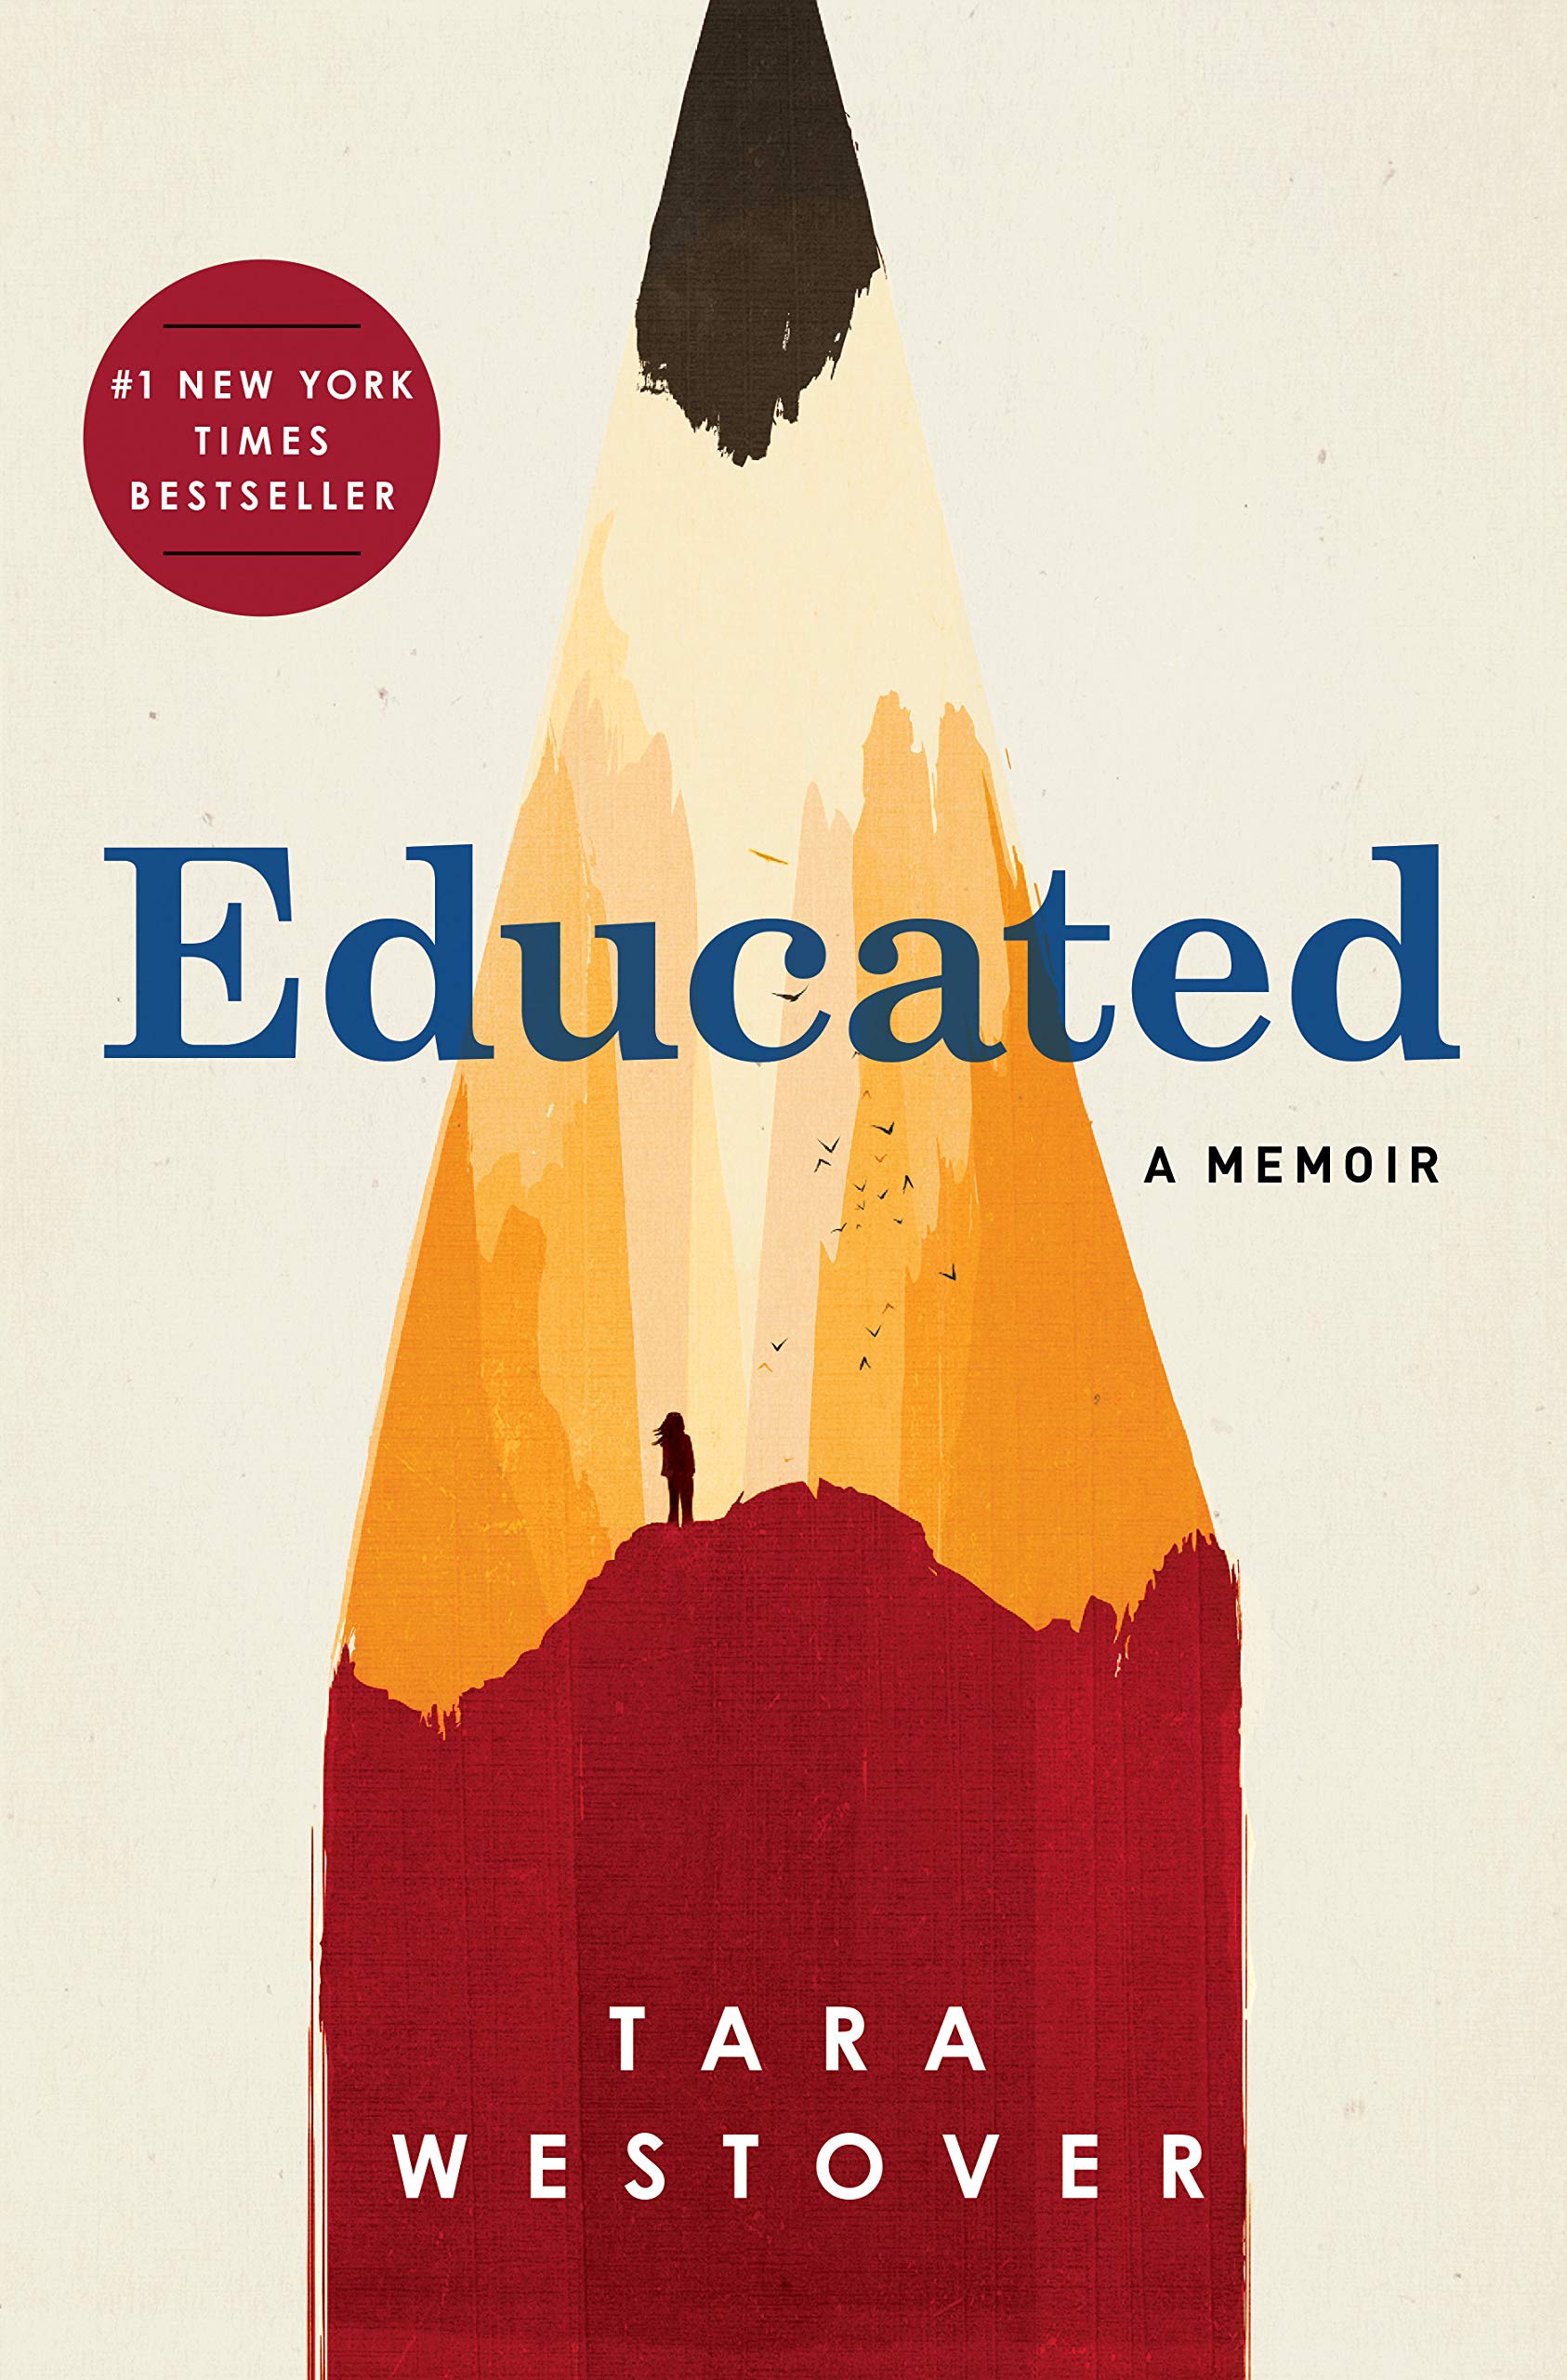 Thoughts on Educated (by Tara Westover)